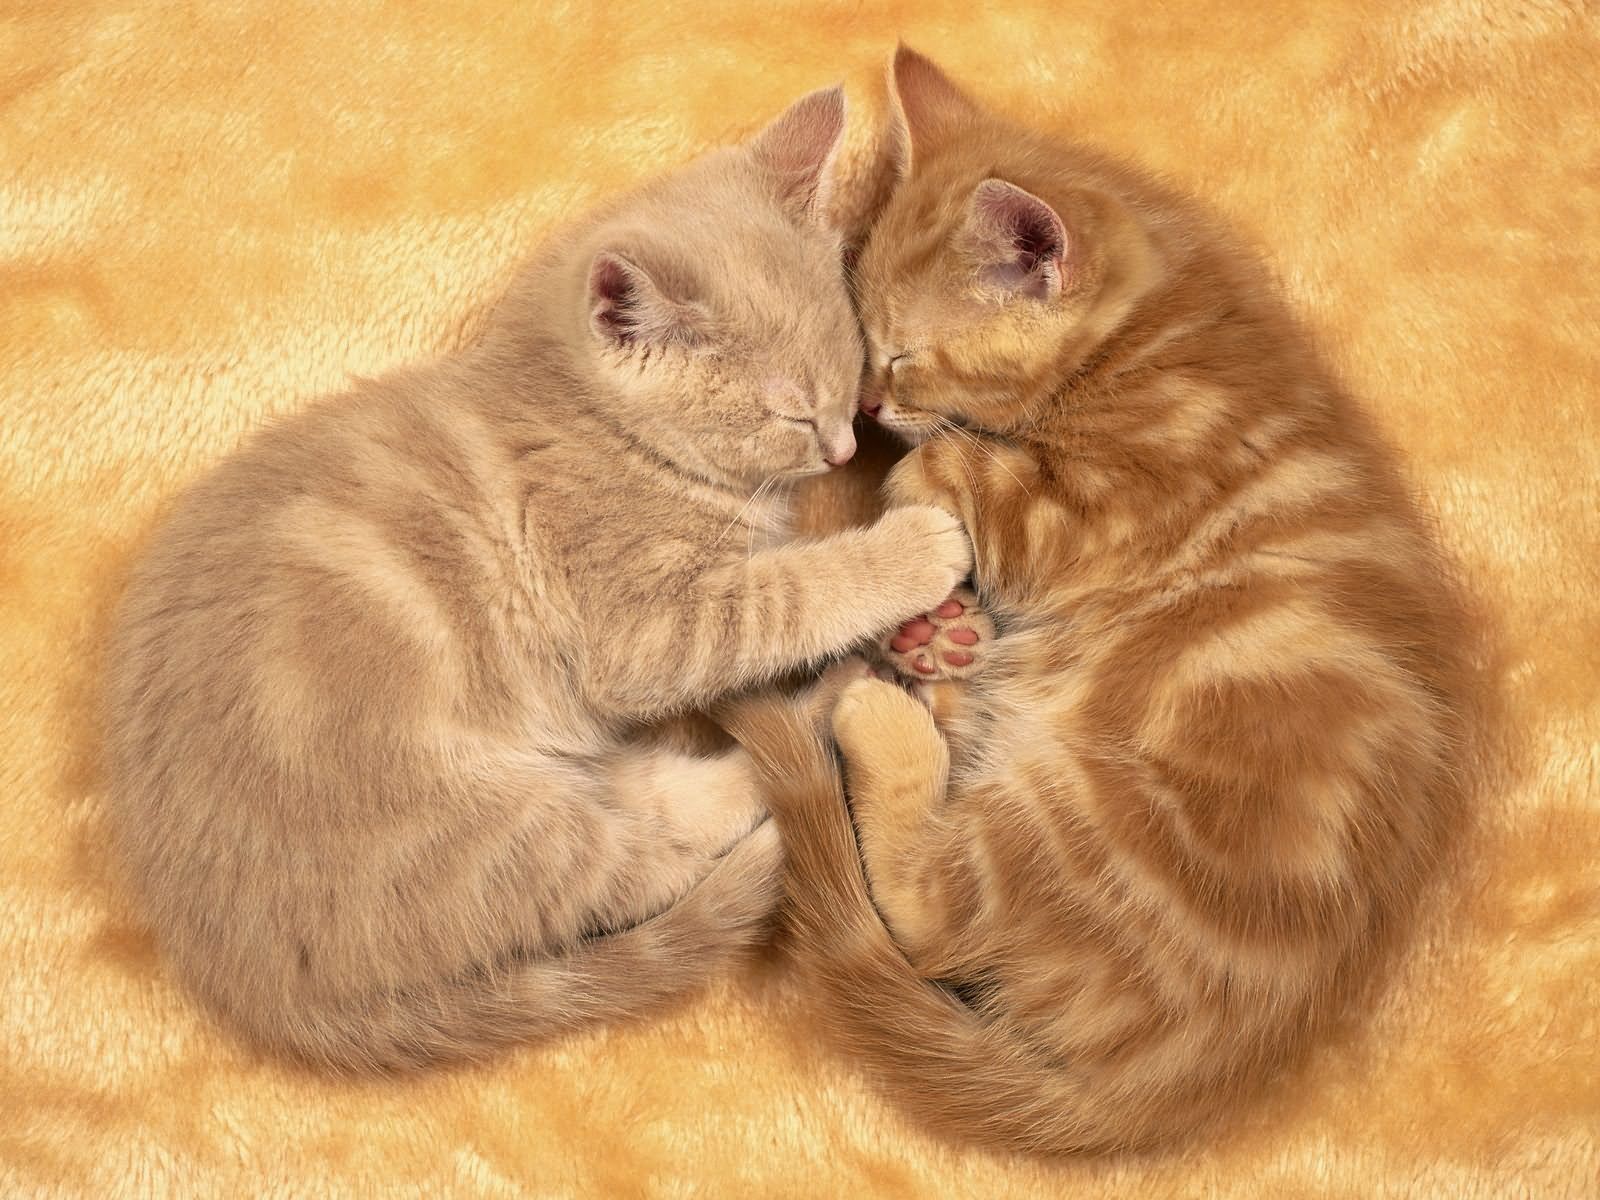 66093 download wallpaper animals, couple, pair, sleep, dream, toddlers, kids, kittens screensavers and pictures for free